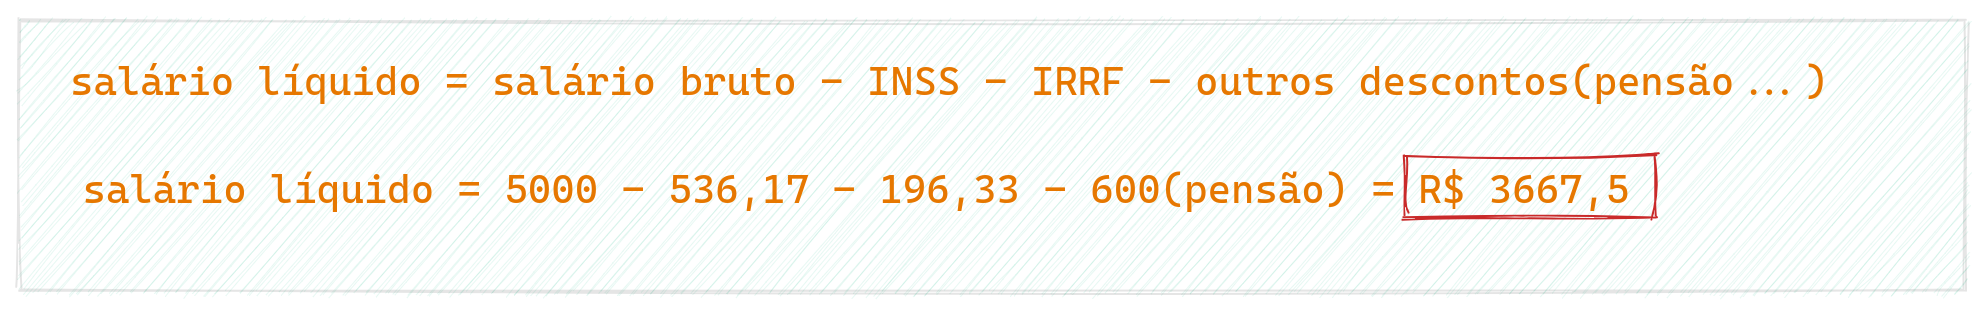 calculo IRRF